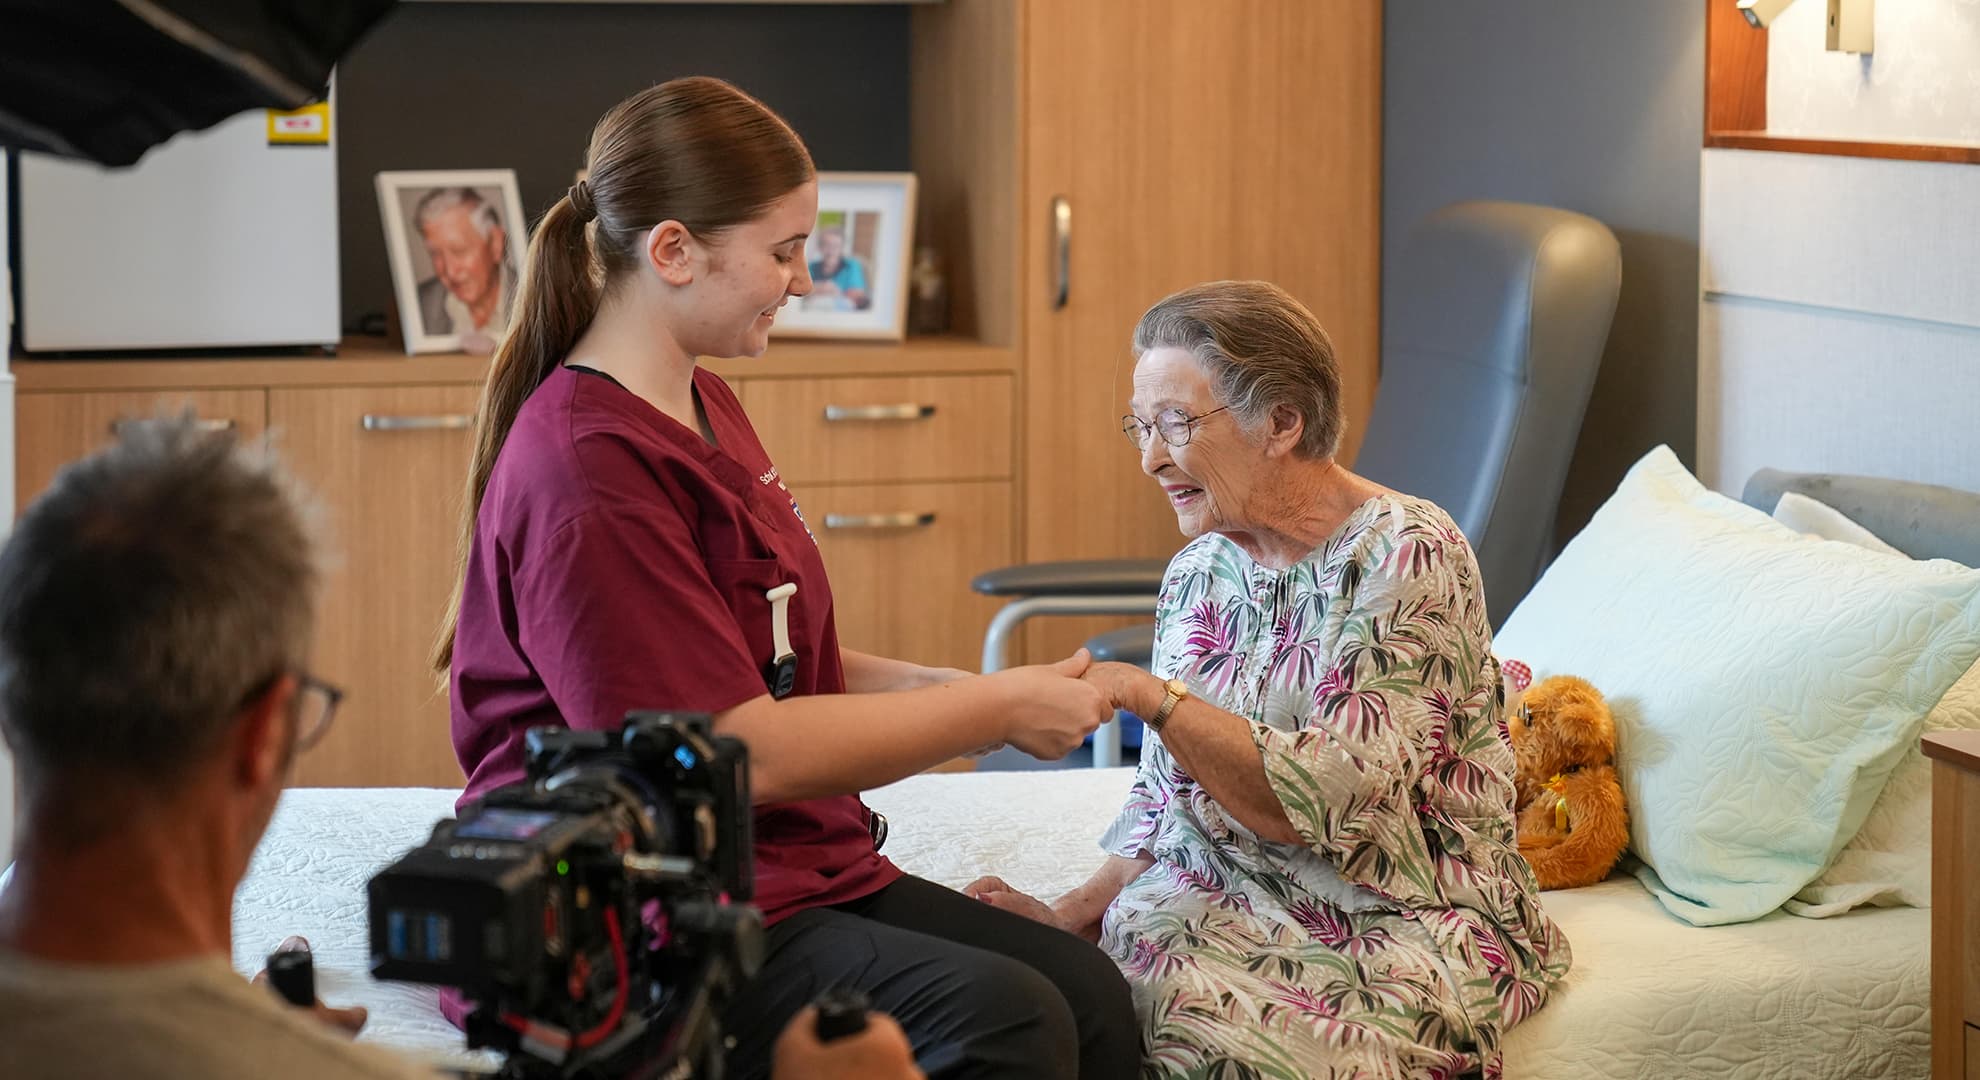 A young nursing student helps an aged care resident rub lotion on her hand. They are in the middle of being filmed for a corporate video story.